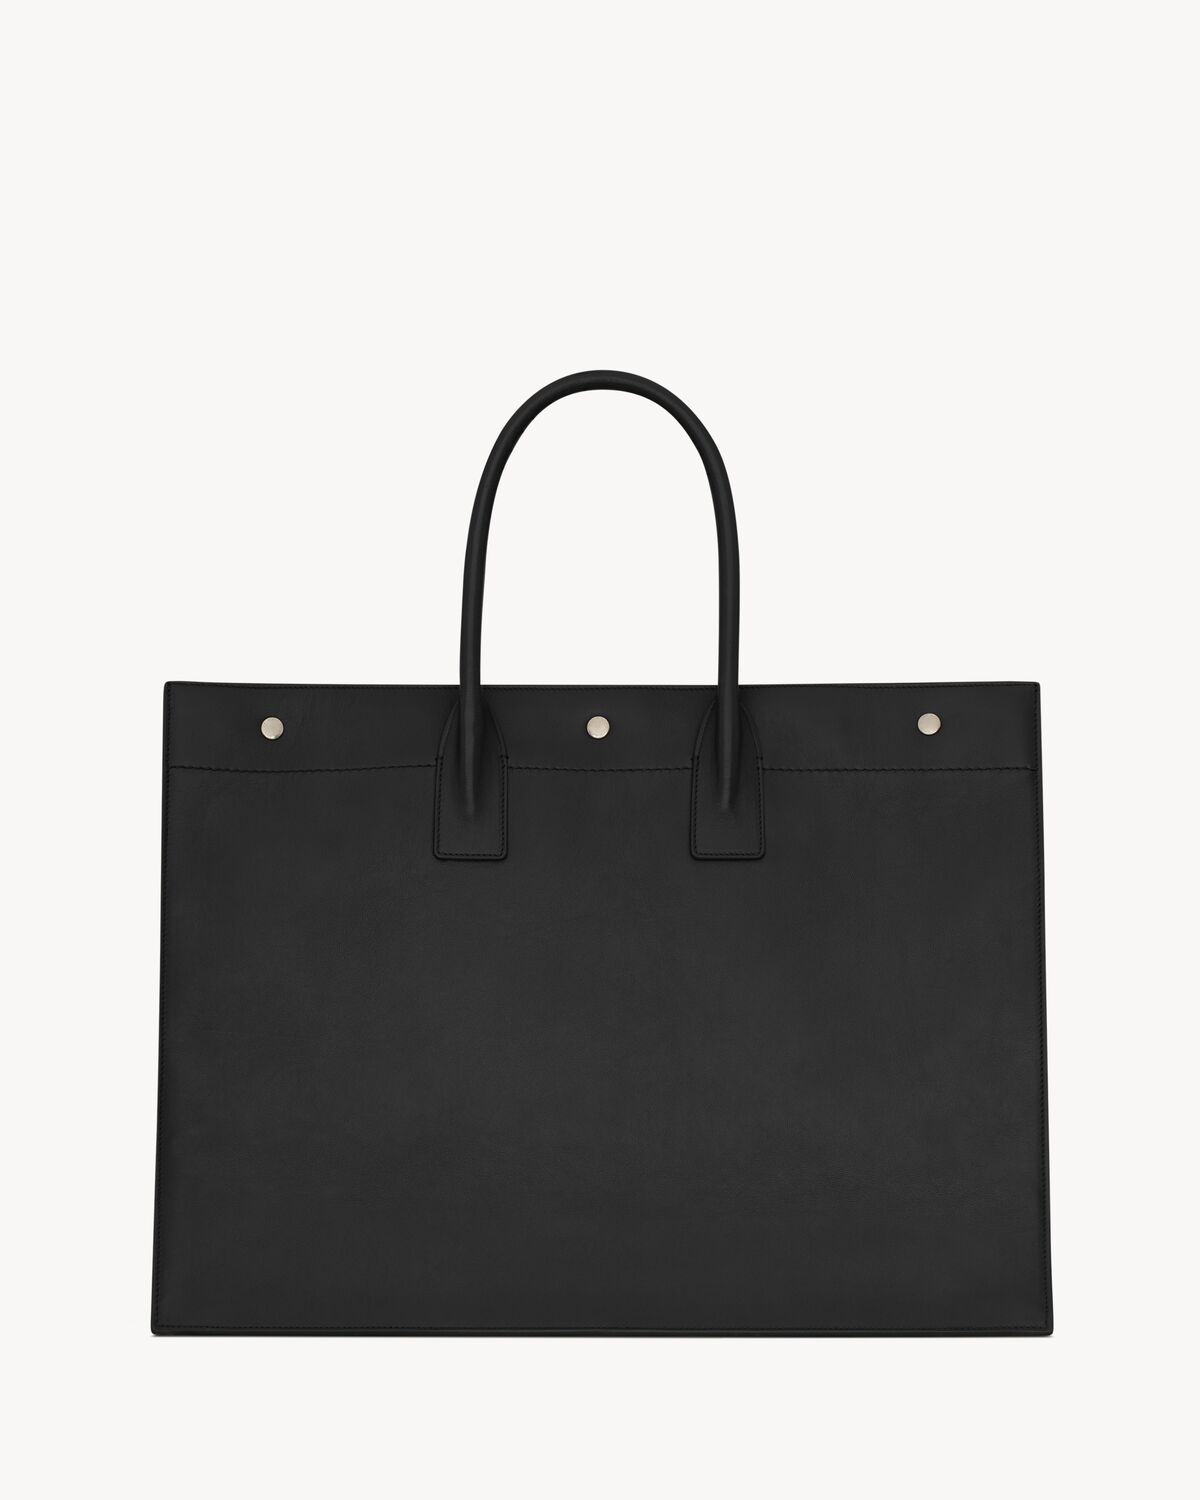 RIVE GAUCHE large tote bag in smooth leather